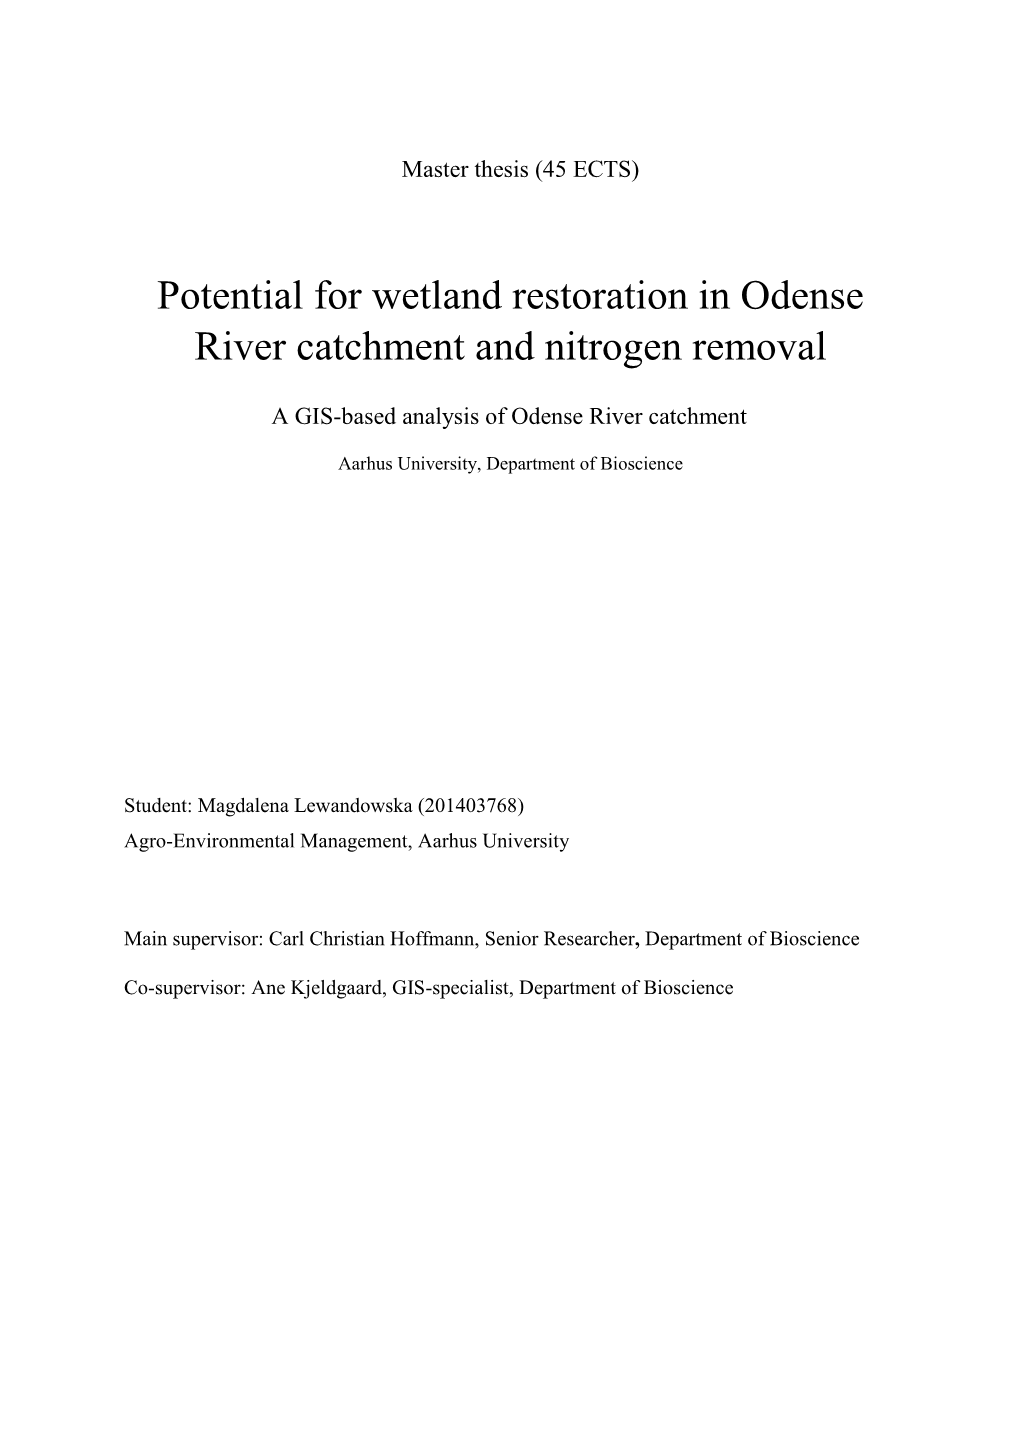 Potential for Wetland Restoration in Odense River Catchment and Nitrogen Removal